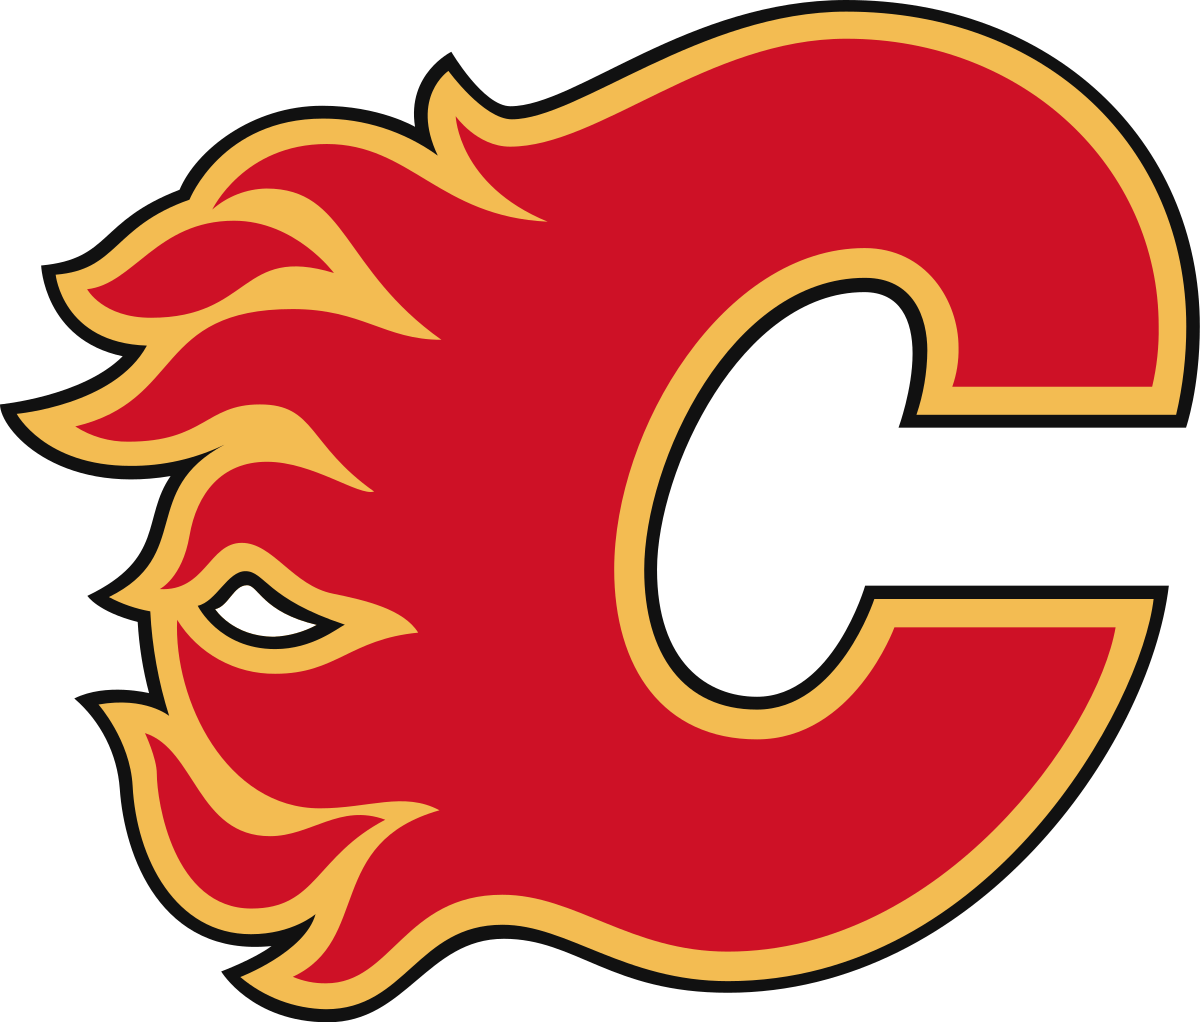 White and Red C Logo - Calgary Flames